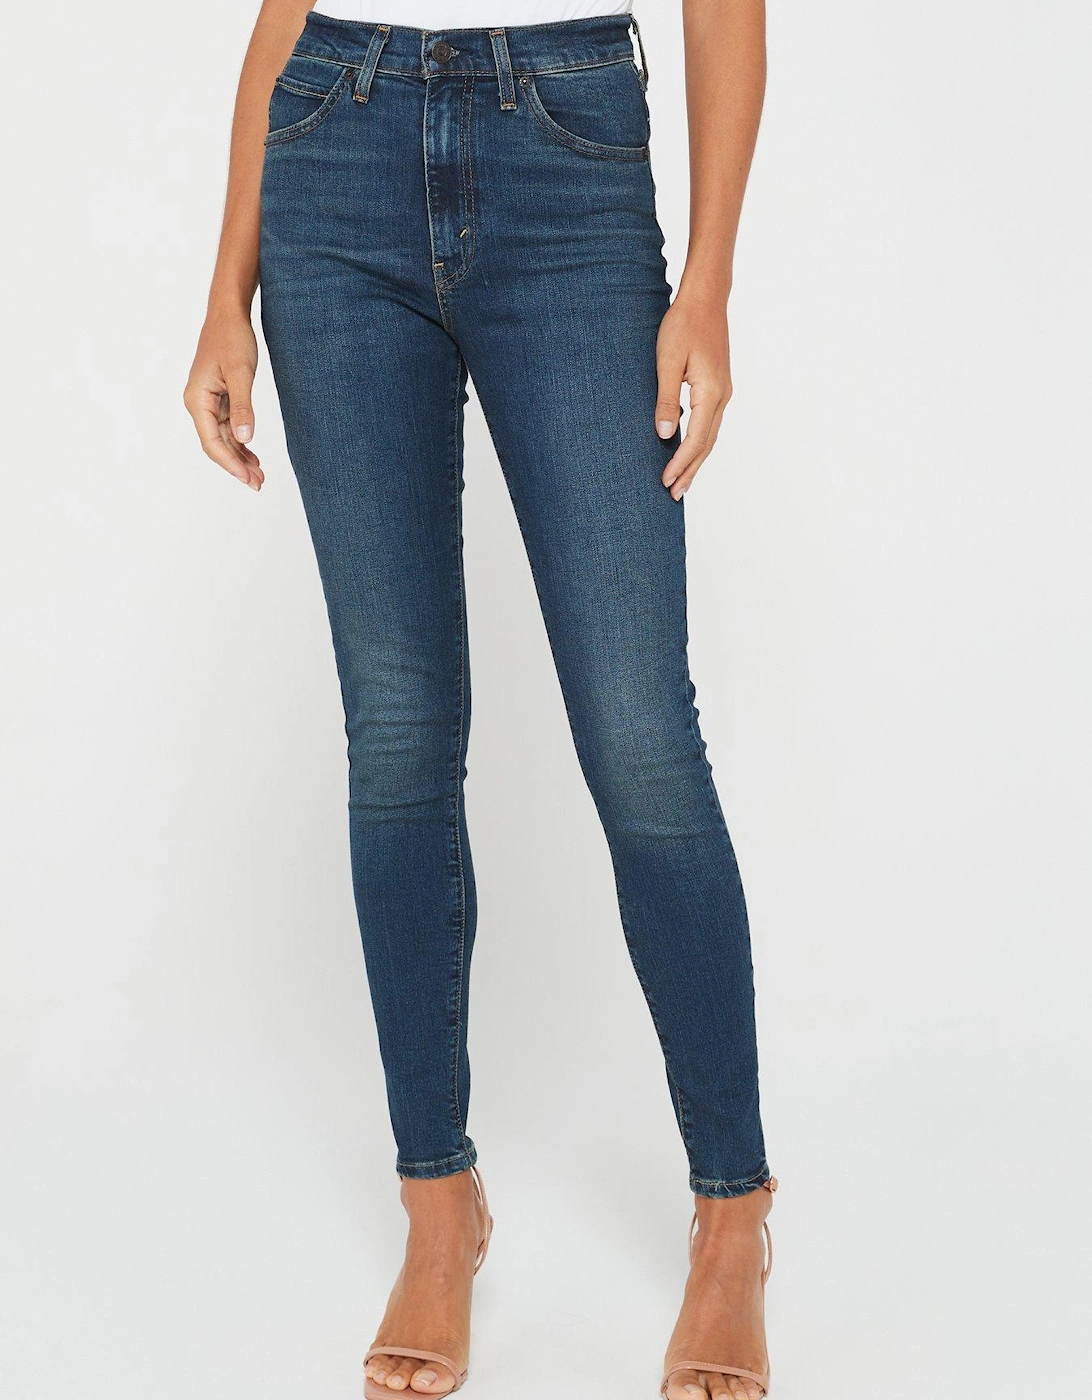 Retro High Rise Skinny Jean - Valuable Time - Blue, 7 of 6